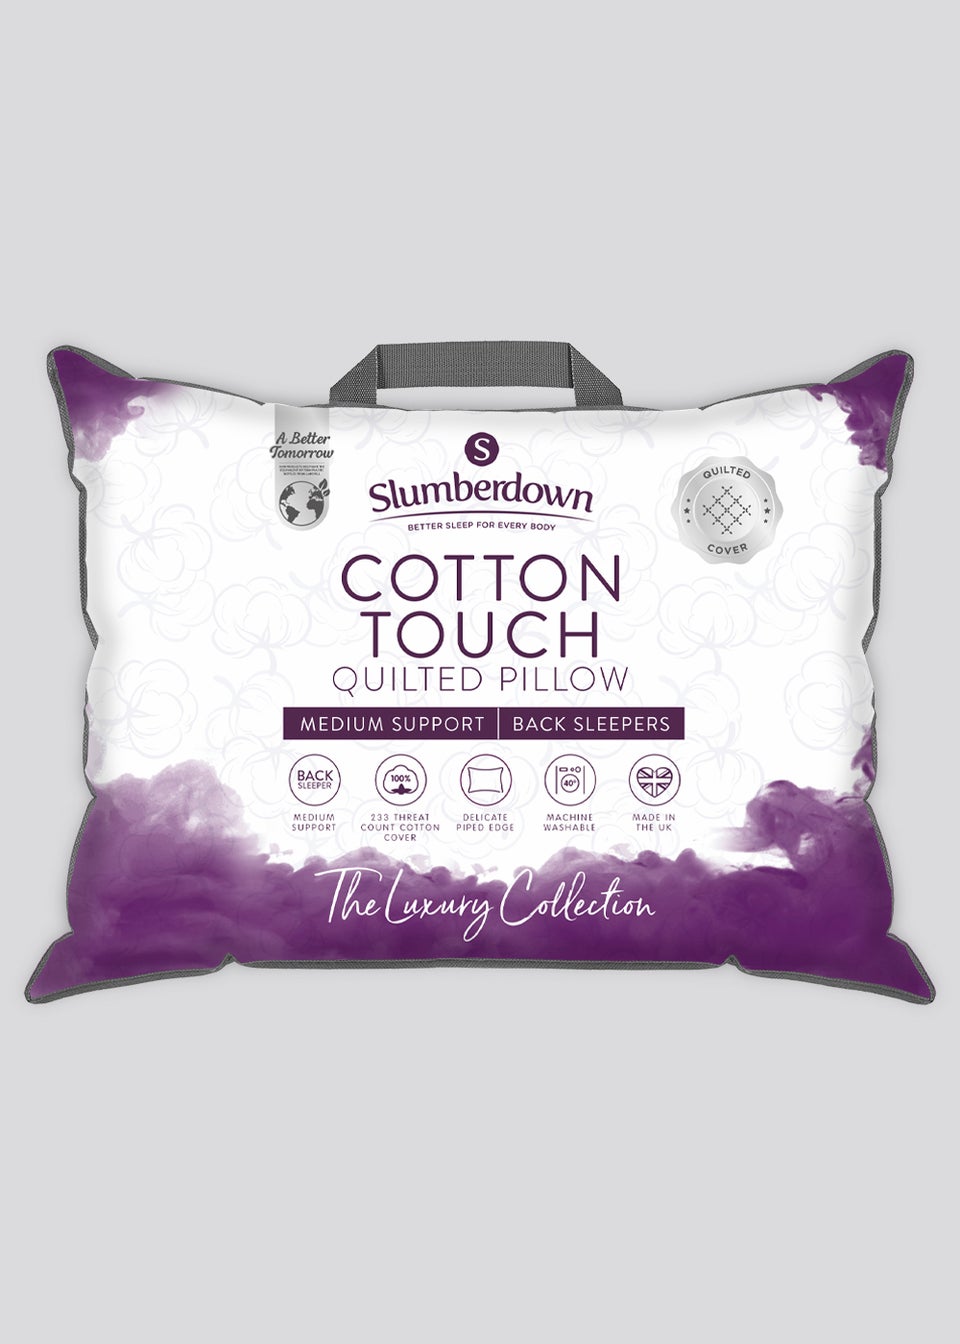 Slumberdown Cotton Touch Quilted Pillow